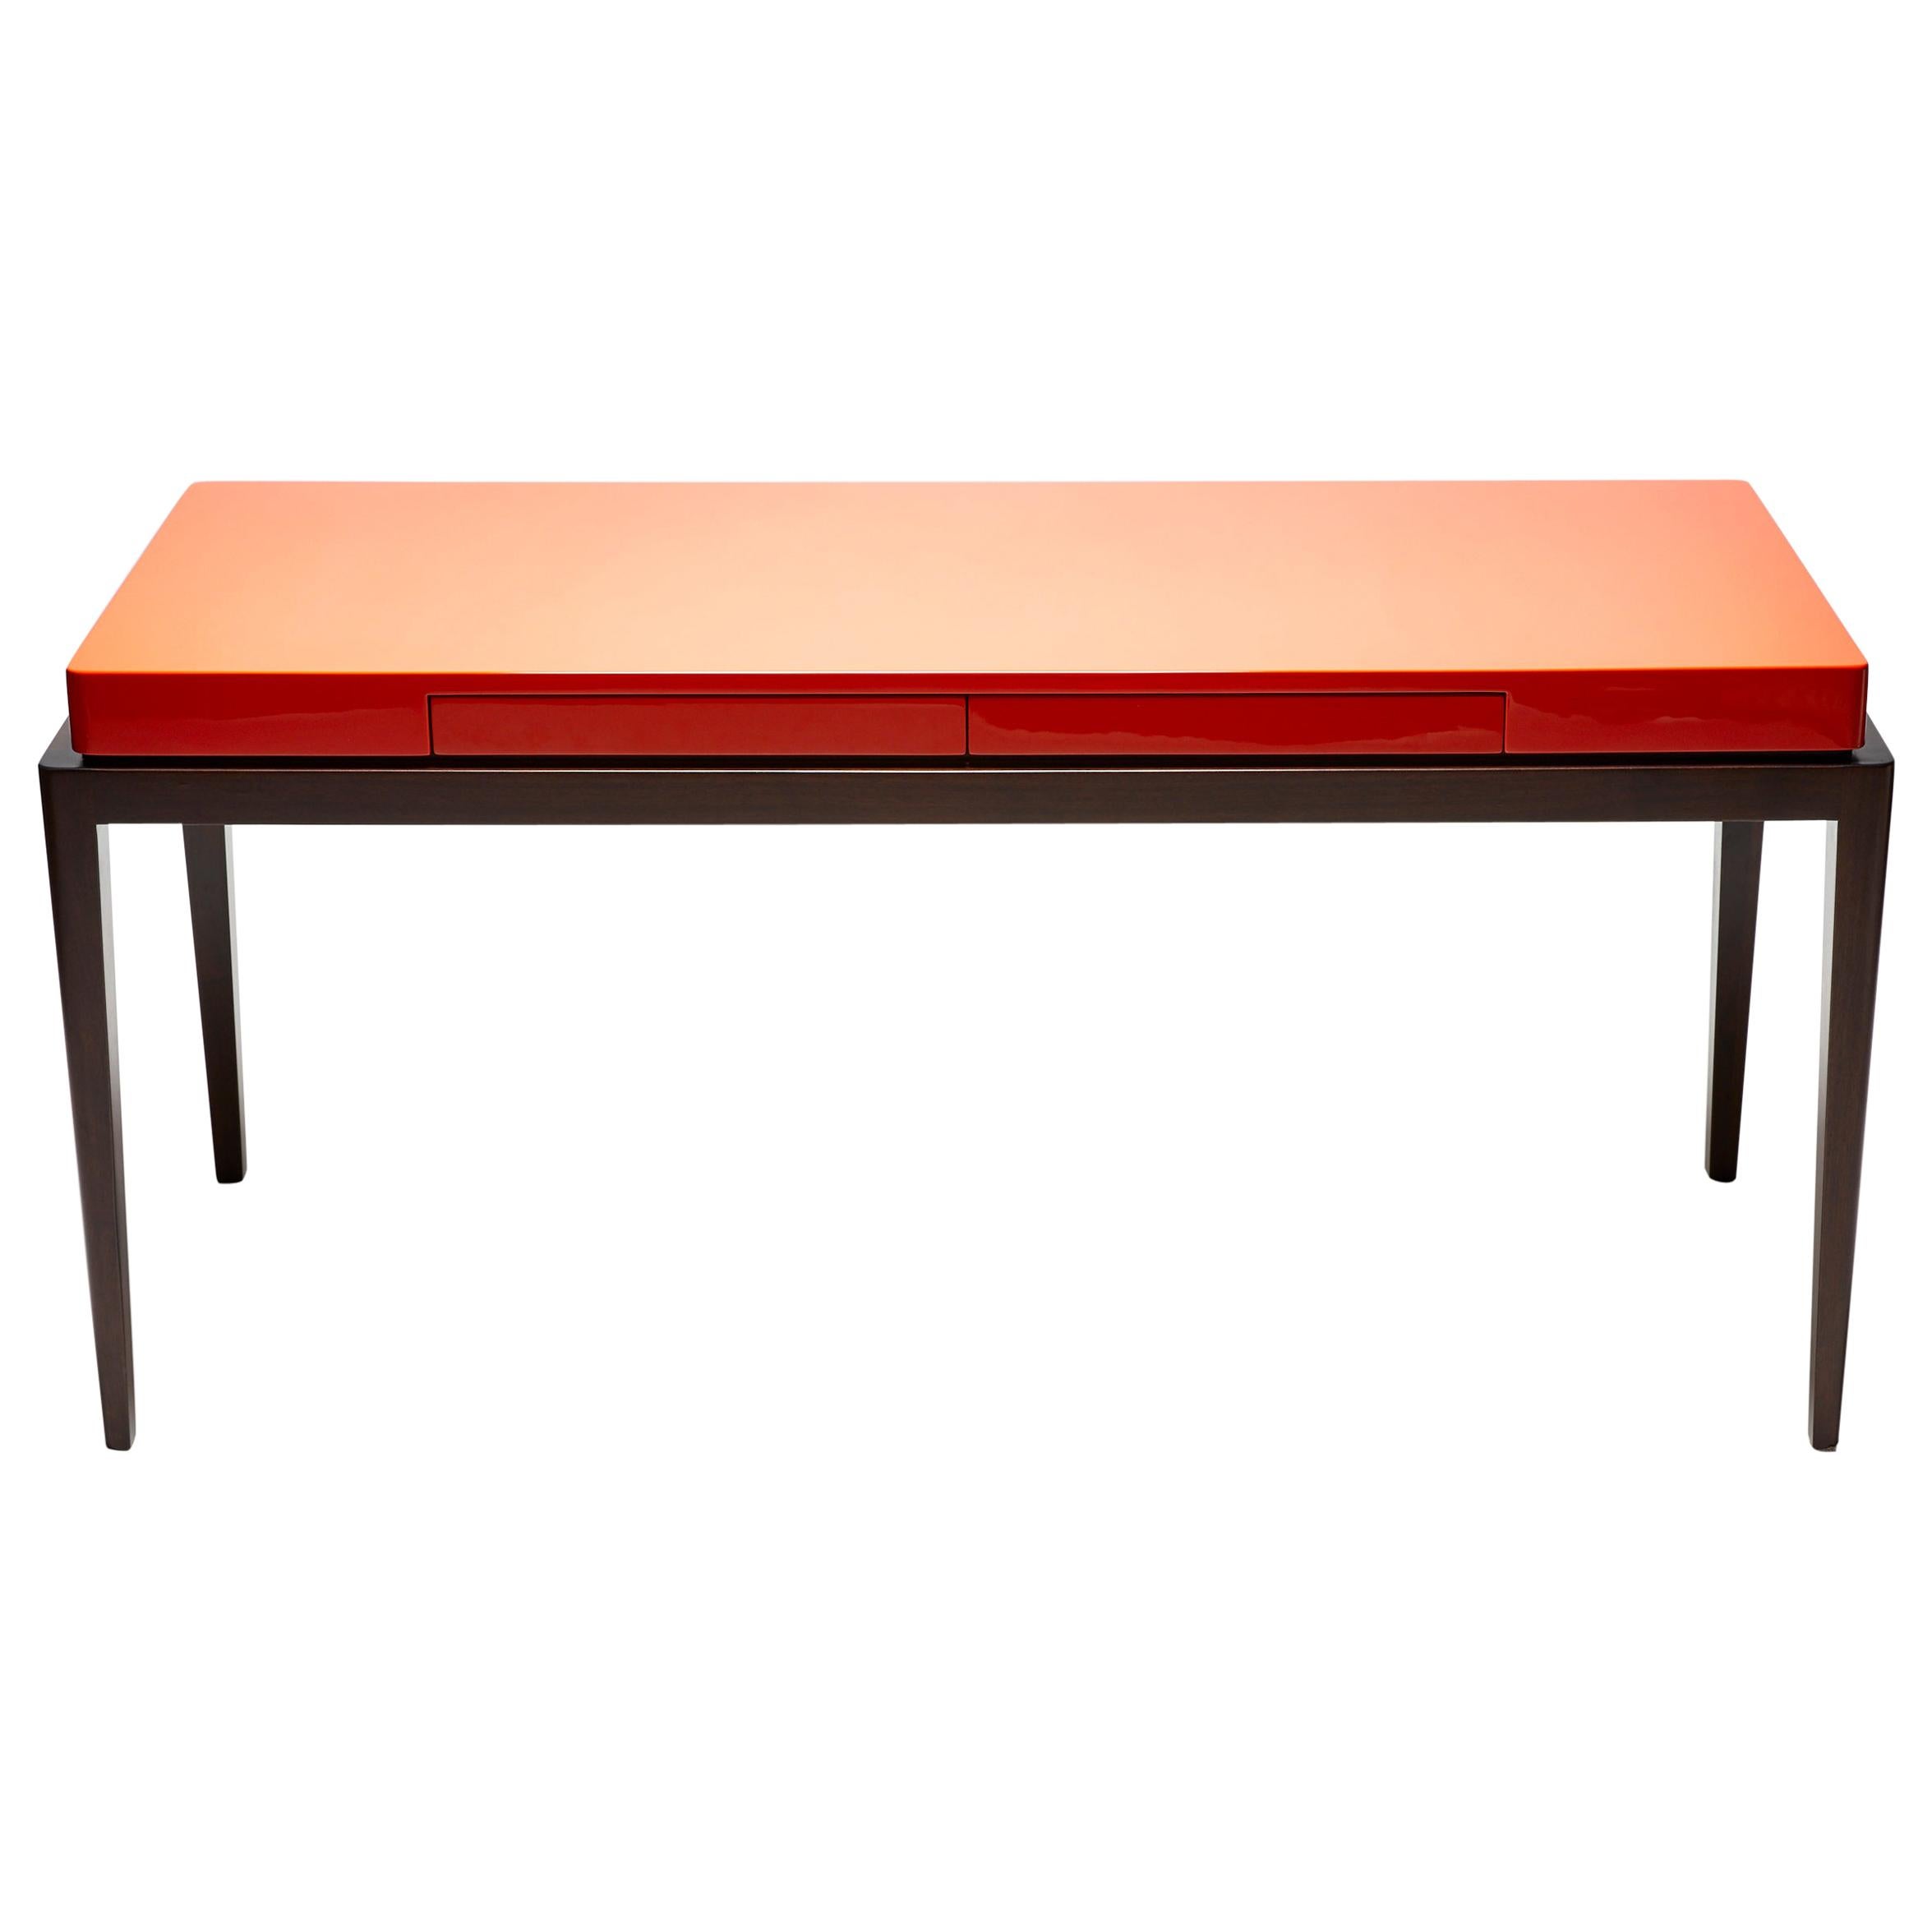 The perfect interior writing desk. Size : 140cm
Flat surface, smooth, purity of the line only asking to be inhabited. If it is a
console or a desk, TARA is a piece that distinguish itself with the power of its
minimalism. It is enough to dress up